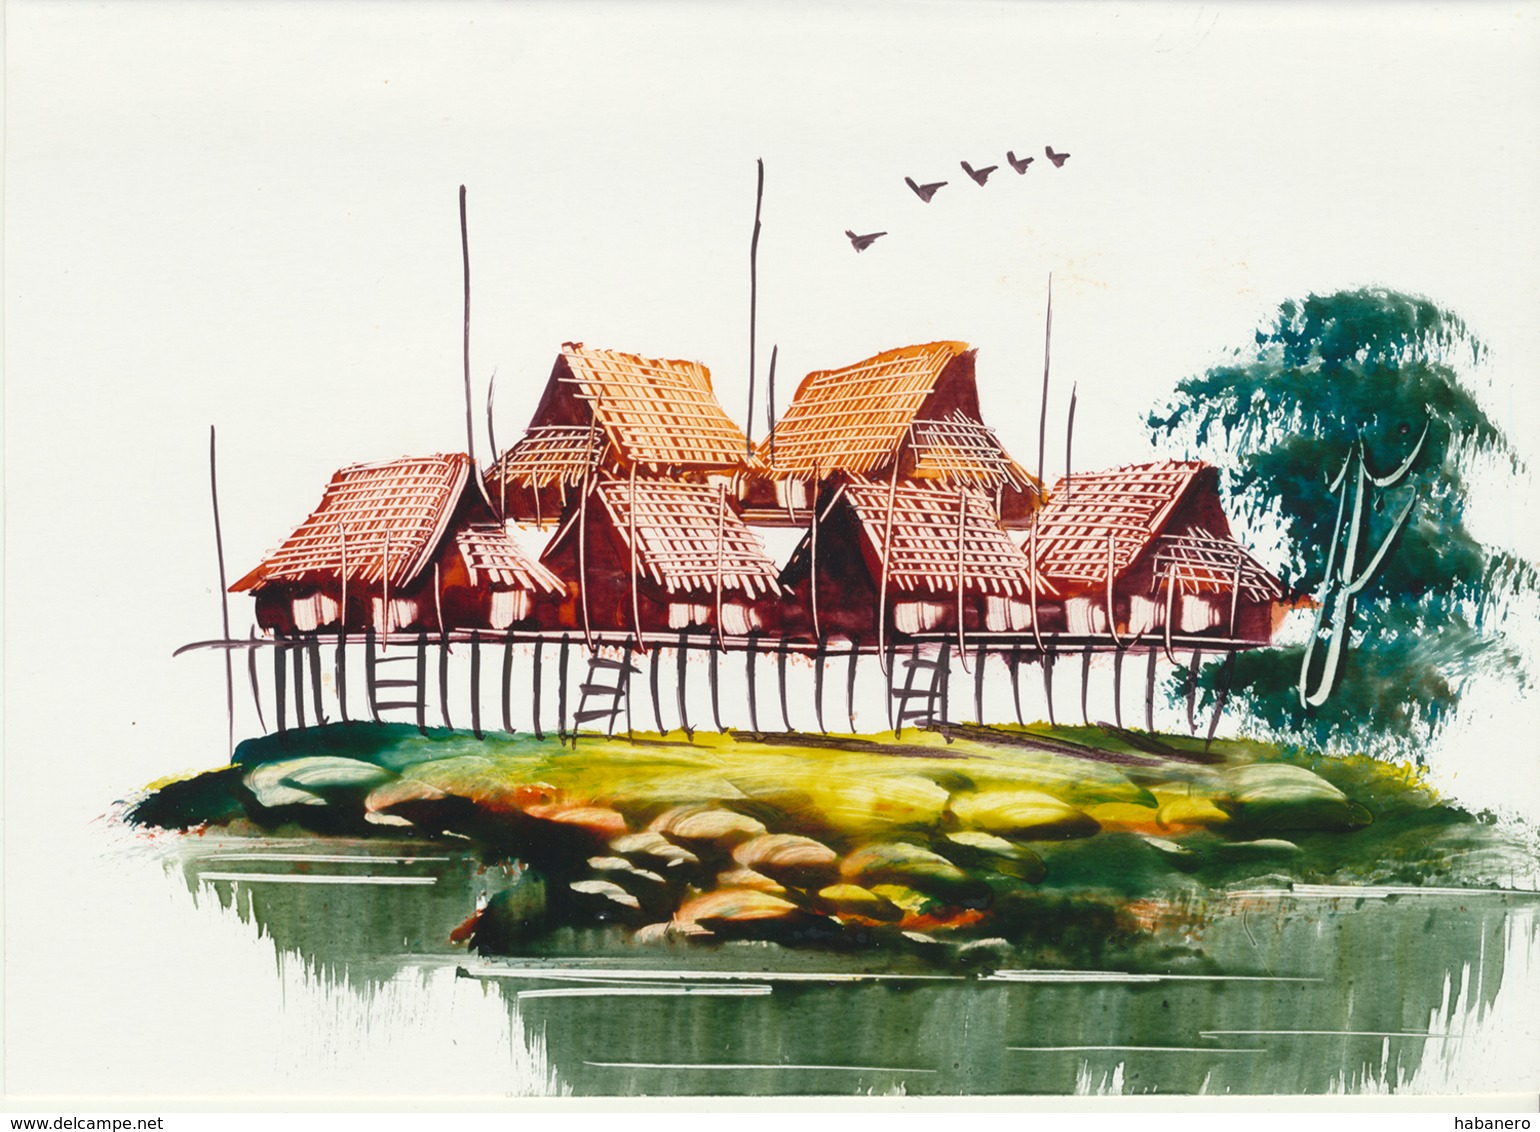 11 pcs of Vietnamese Handpainted Miniatyre Paintings on Fold-out Paper